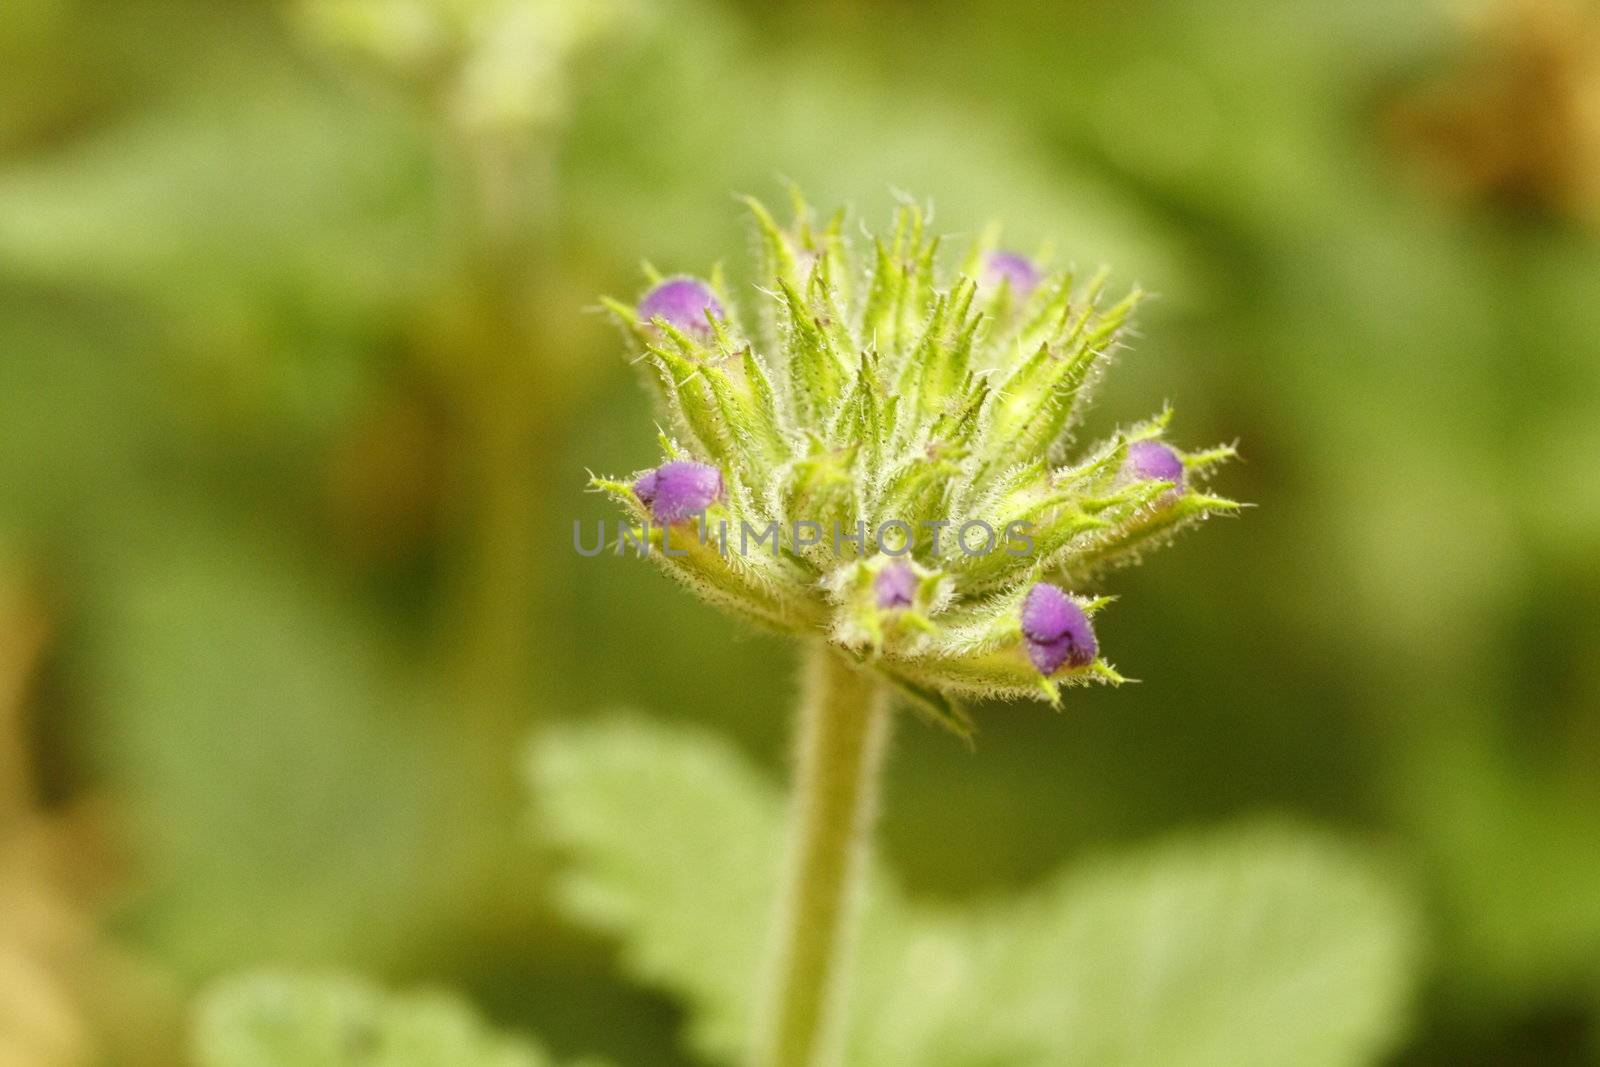 Young flower buds